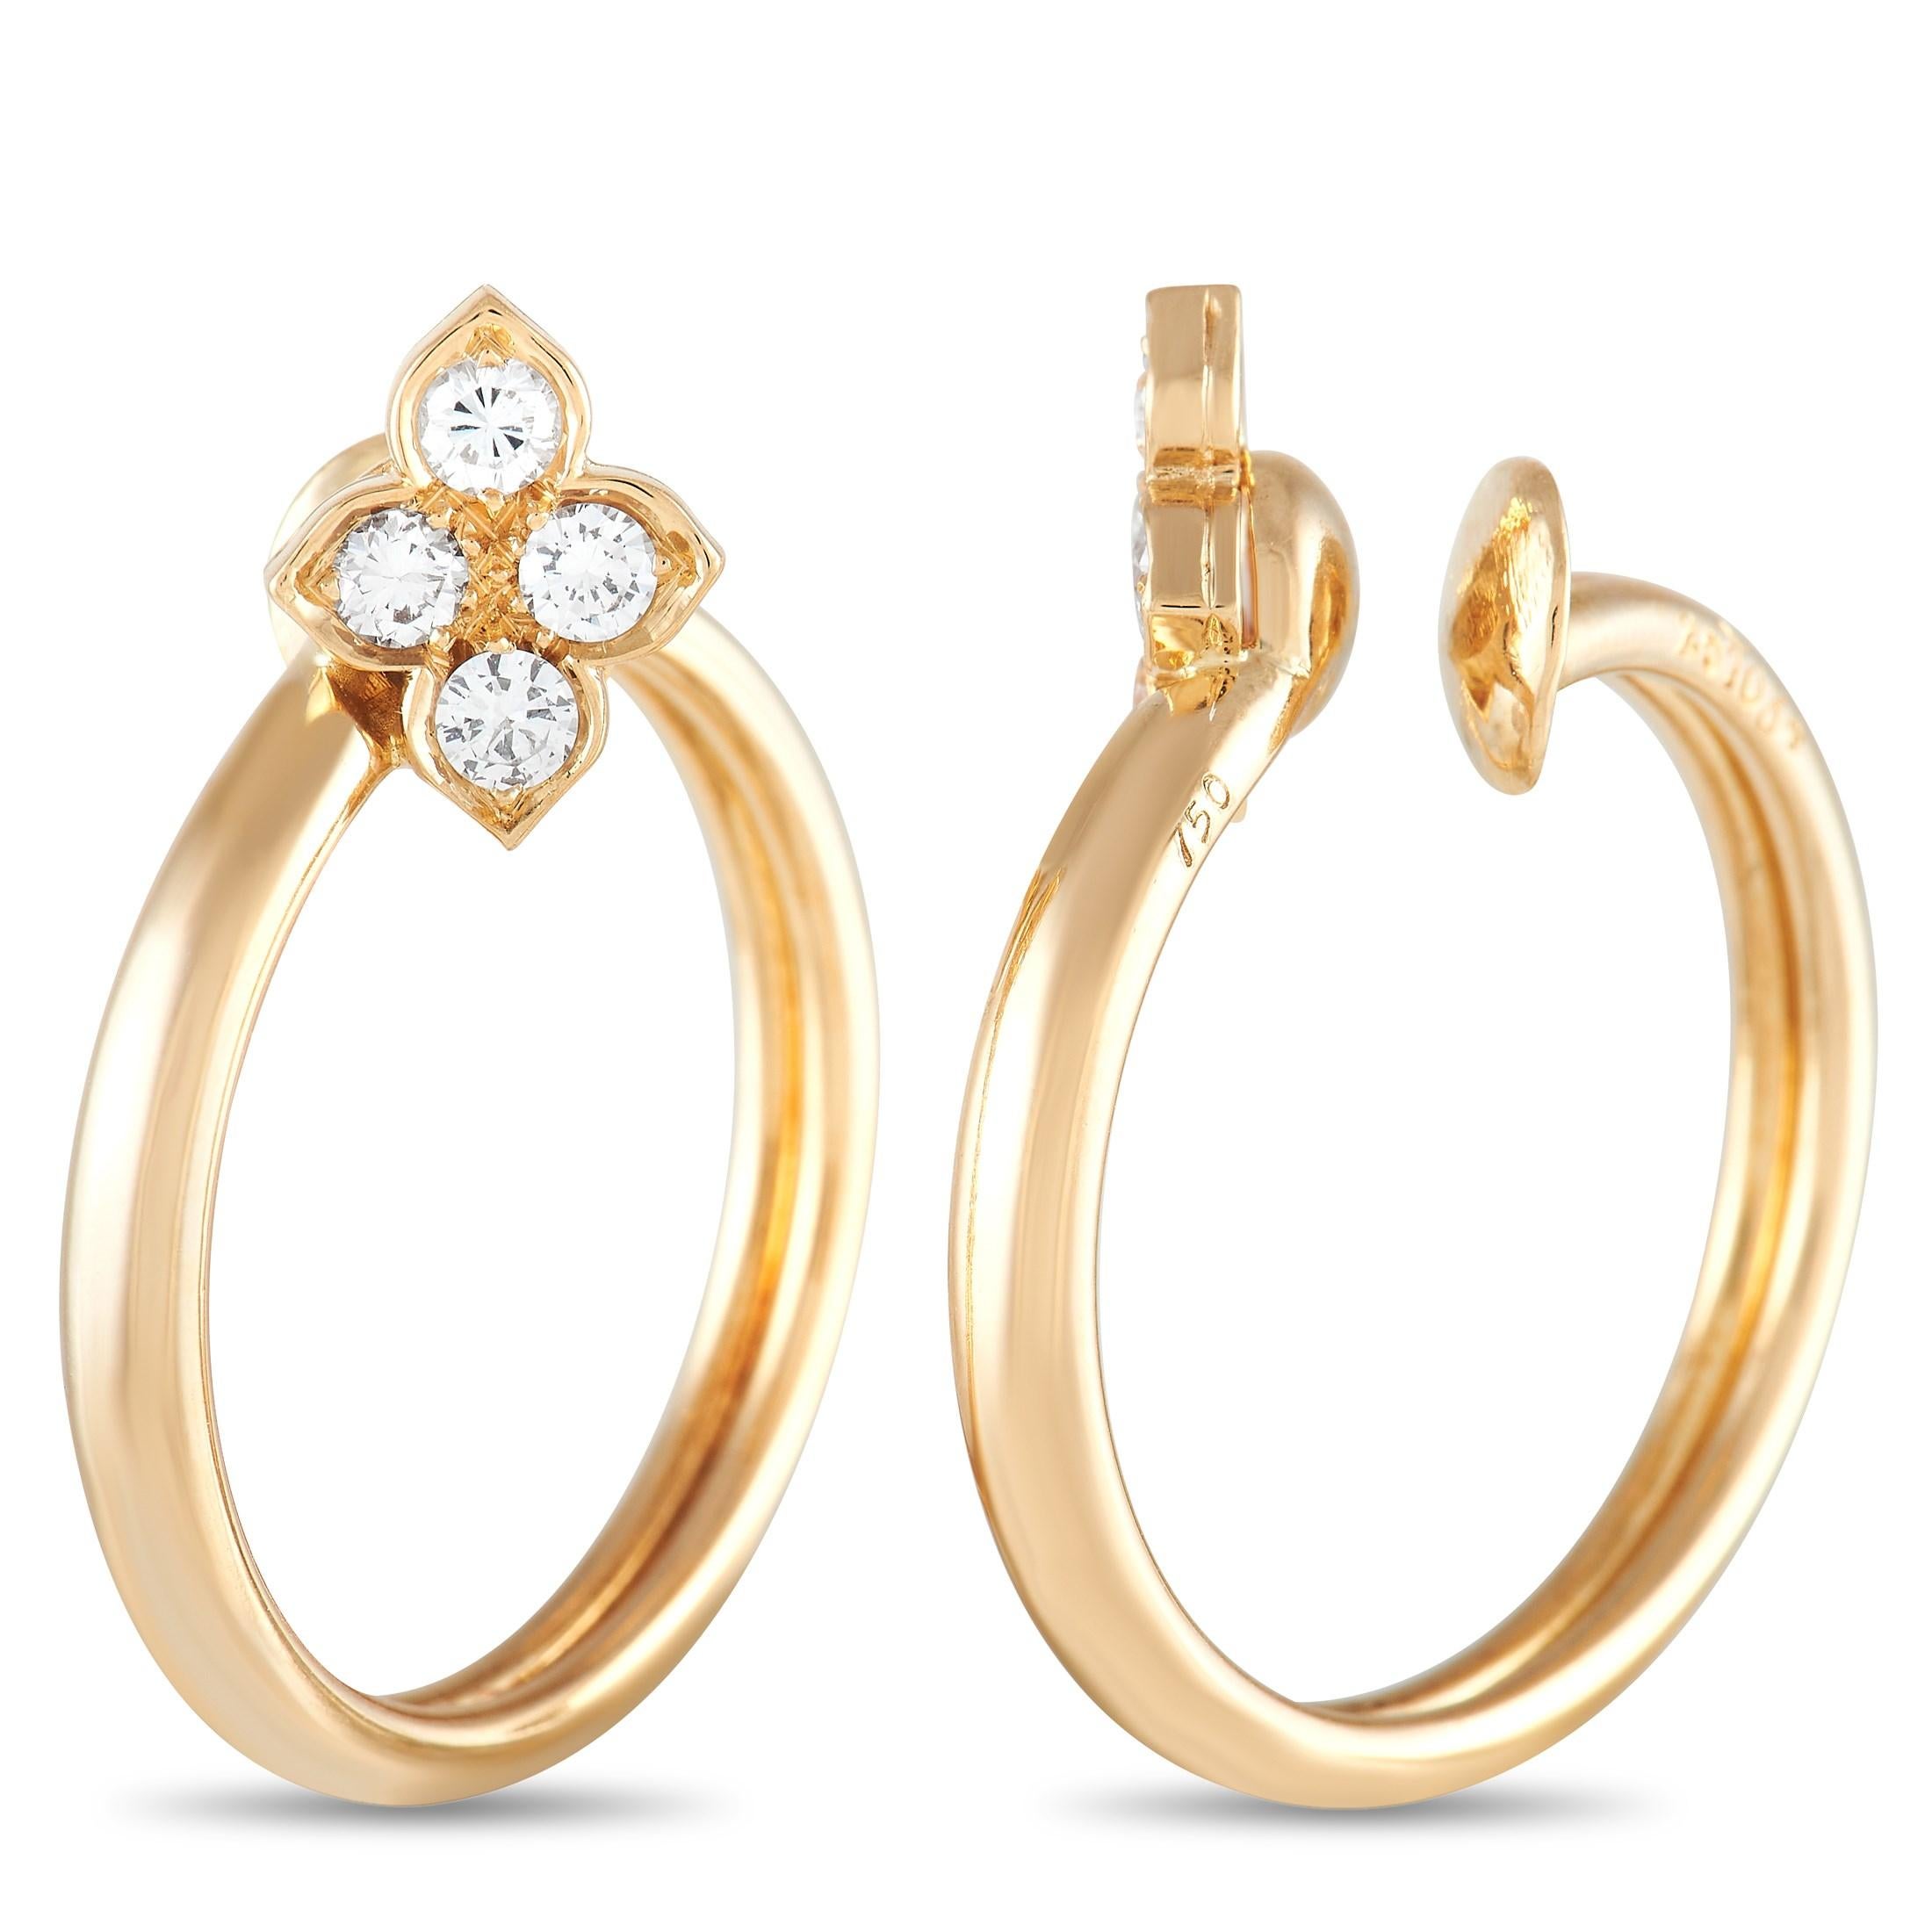 These sleek, elegant Cartier Hindu are striking in their simplicity. Each one is crafted from 18K Yellow Gold and measures 1.25” long by 1.0” wide. Sparkling diamonds totaling 0.65 carats add a touch of sparkle to these exquisite luxury earrings. 